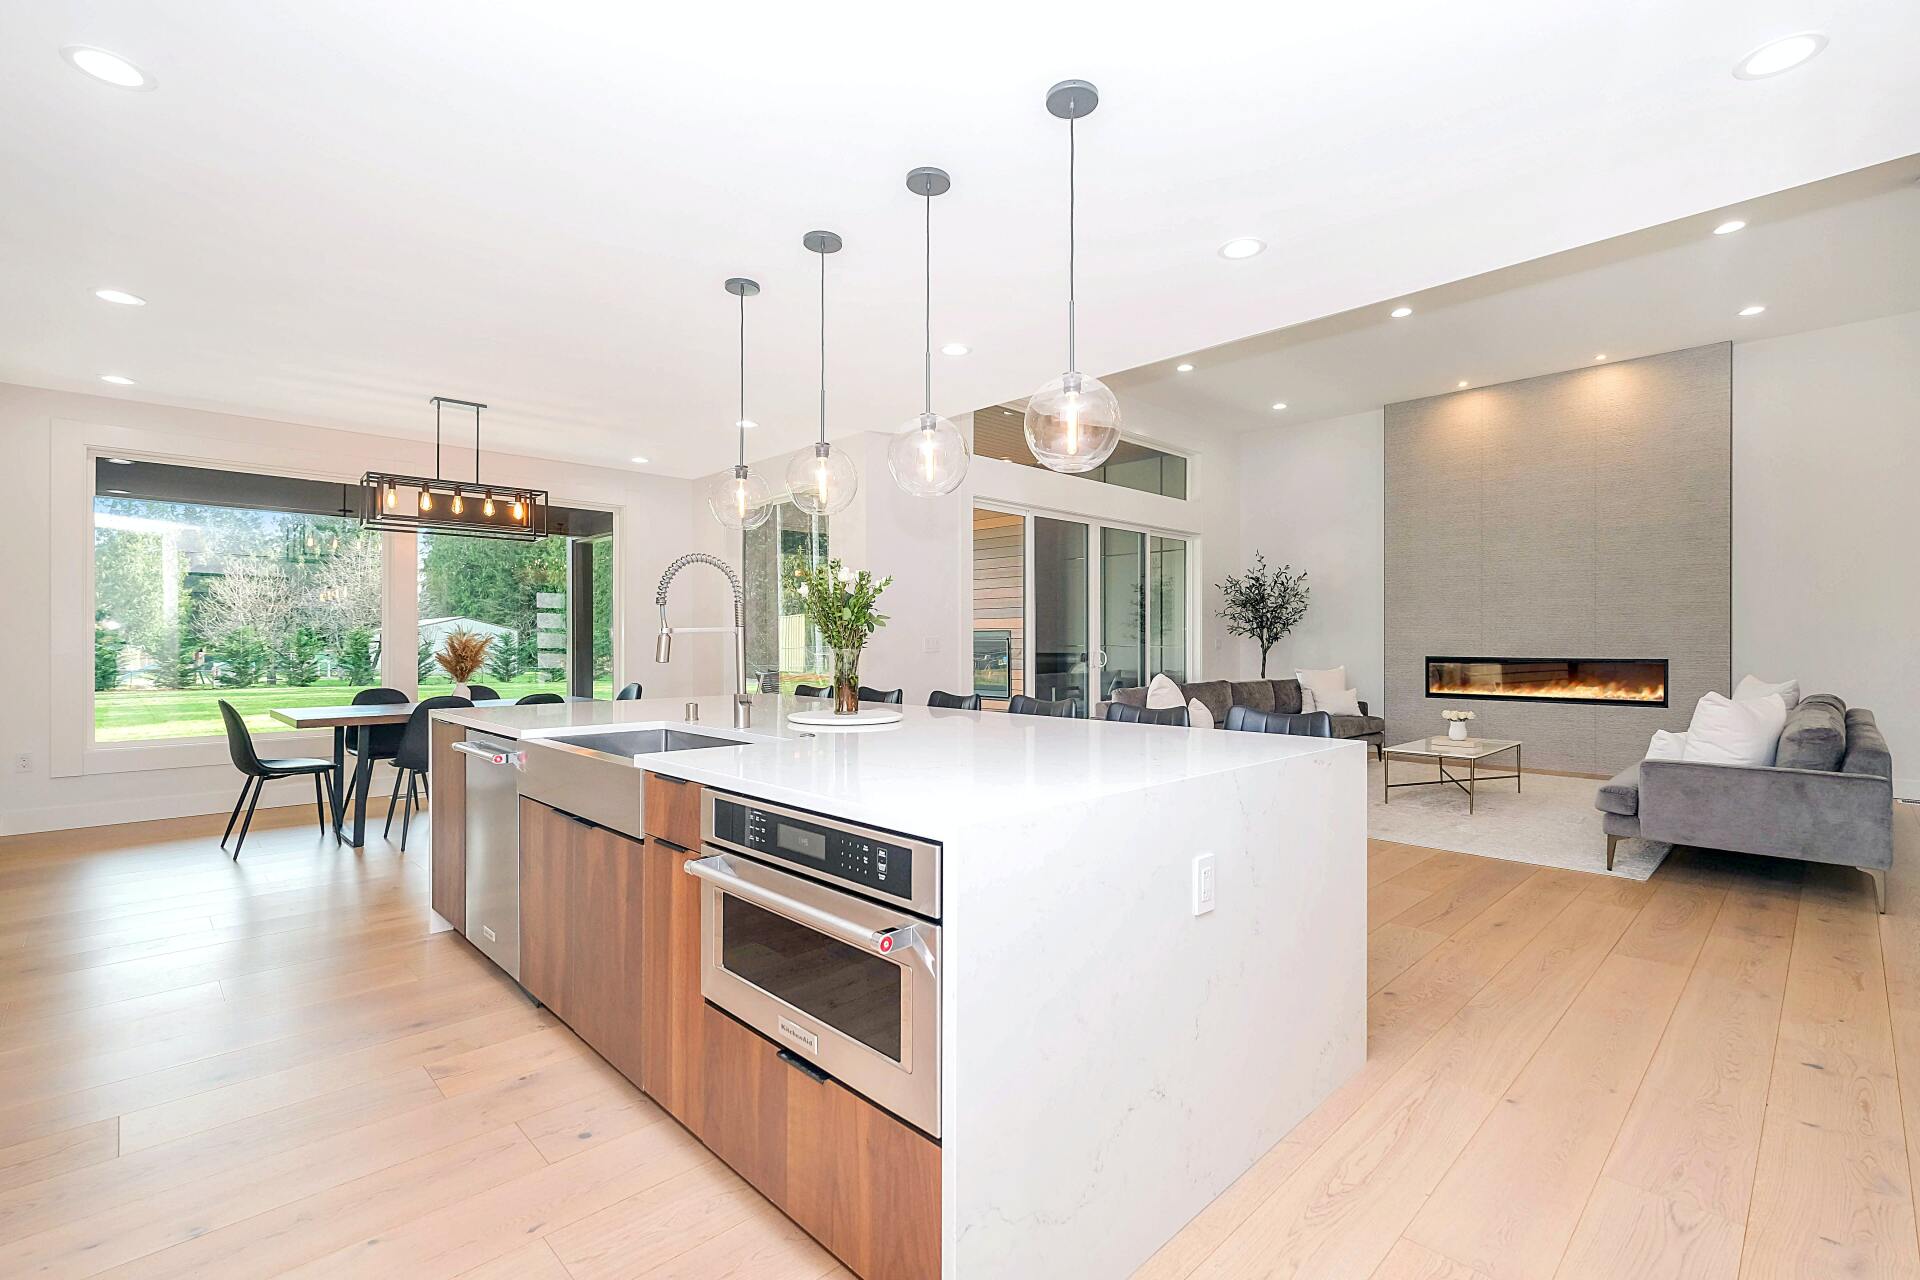 Contemporary kitchen with stainless and wooden accents, with a living room featuring a fireplace Los Angeles homes for sale by Lisa Kirshner Properties